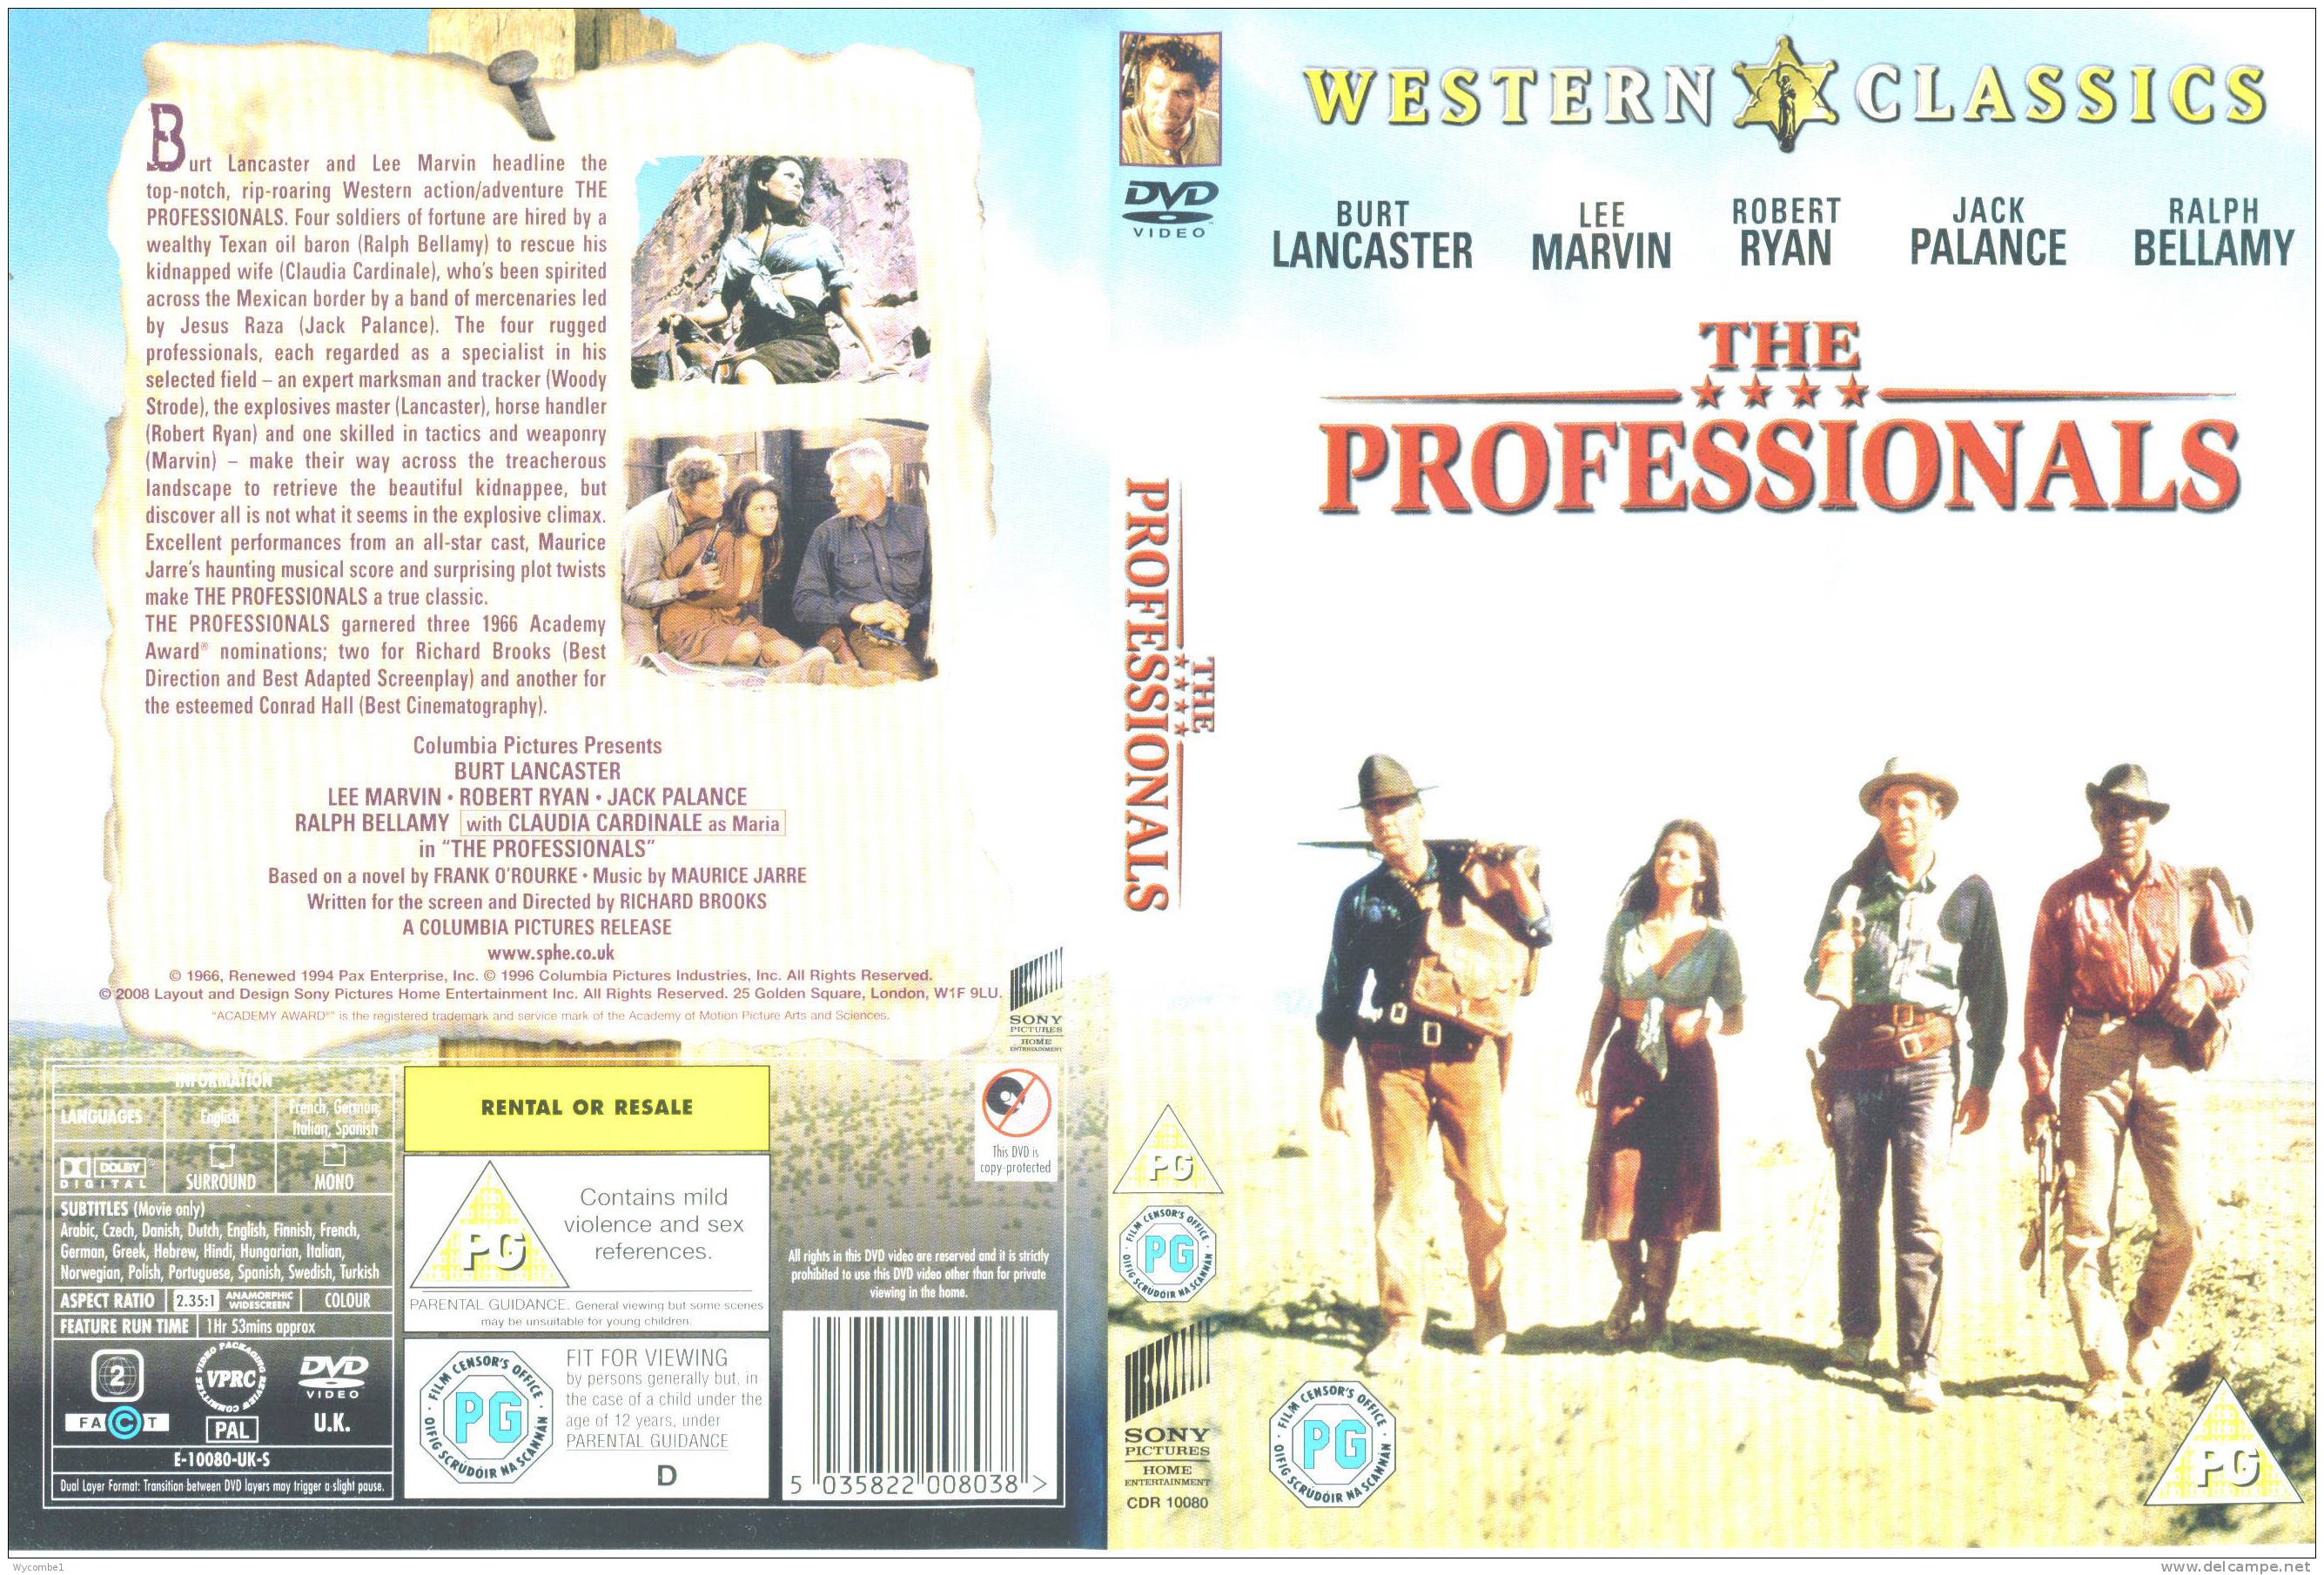 THE PROFESSIONALS - Lee Marvin (Details In Scan) - Western